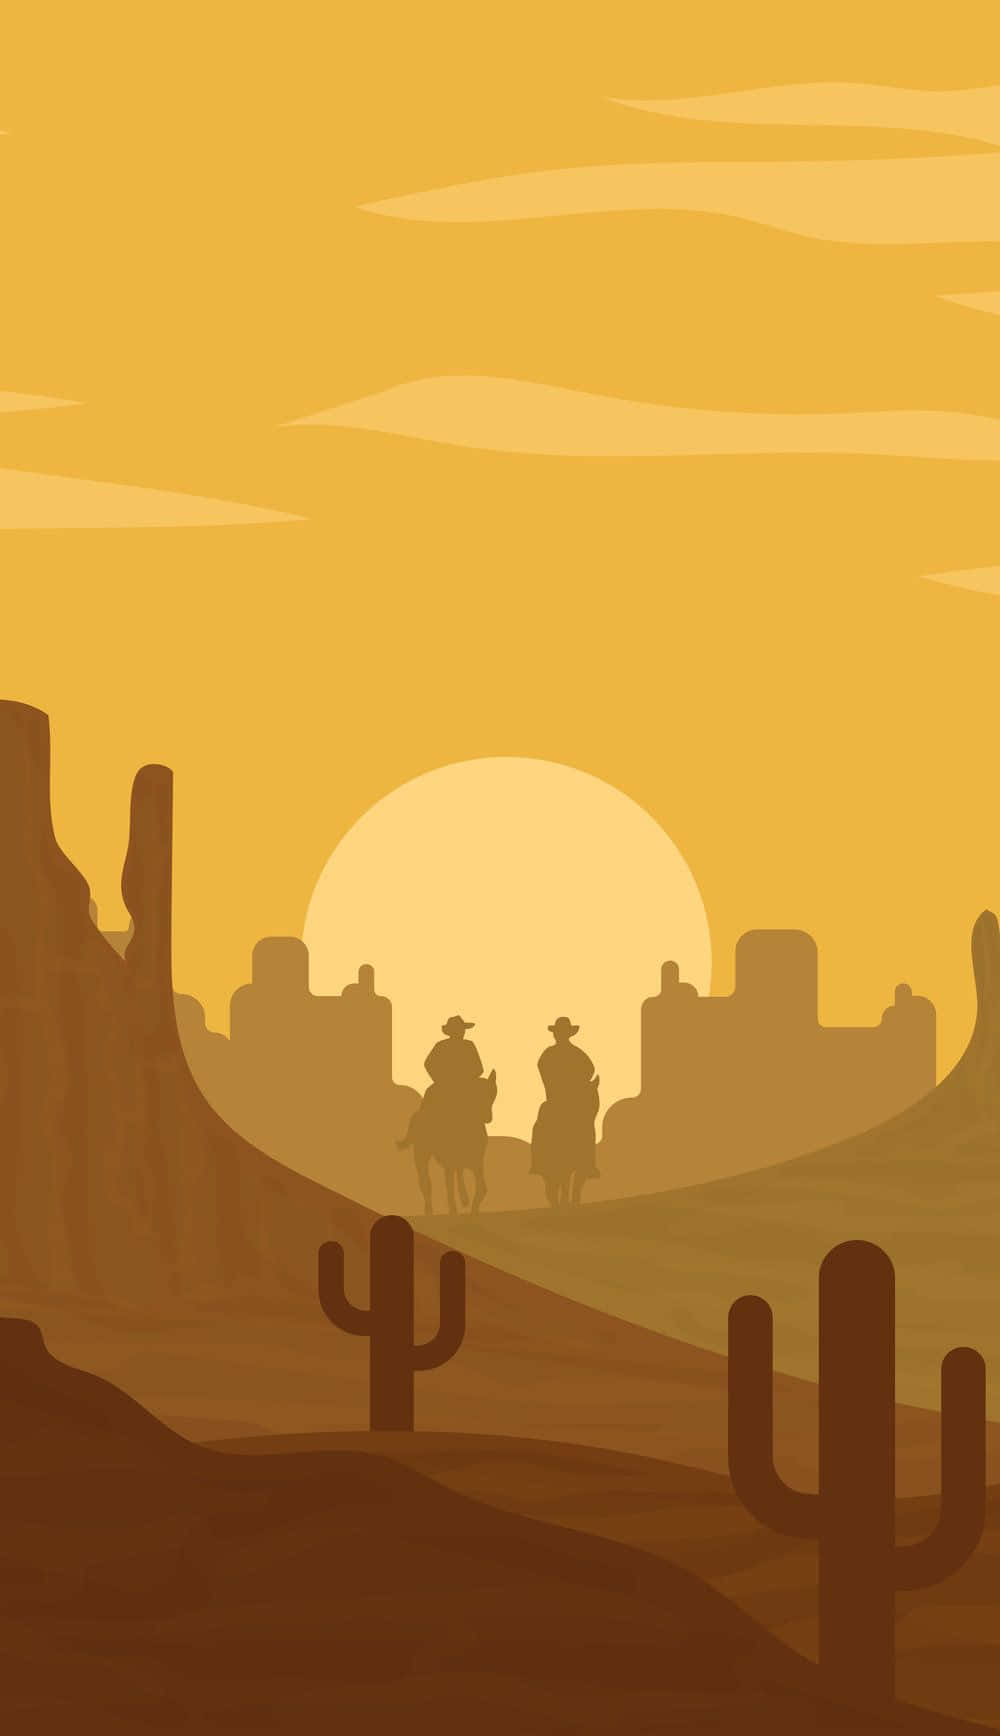 Two Cowboys Riding Horses In The Desert Wallpaper